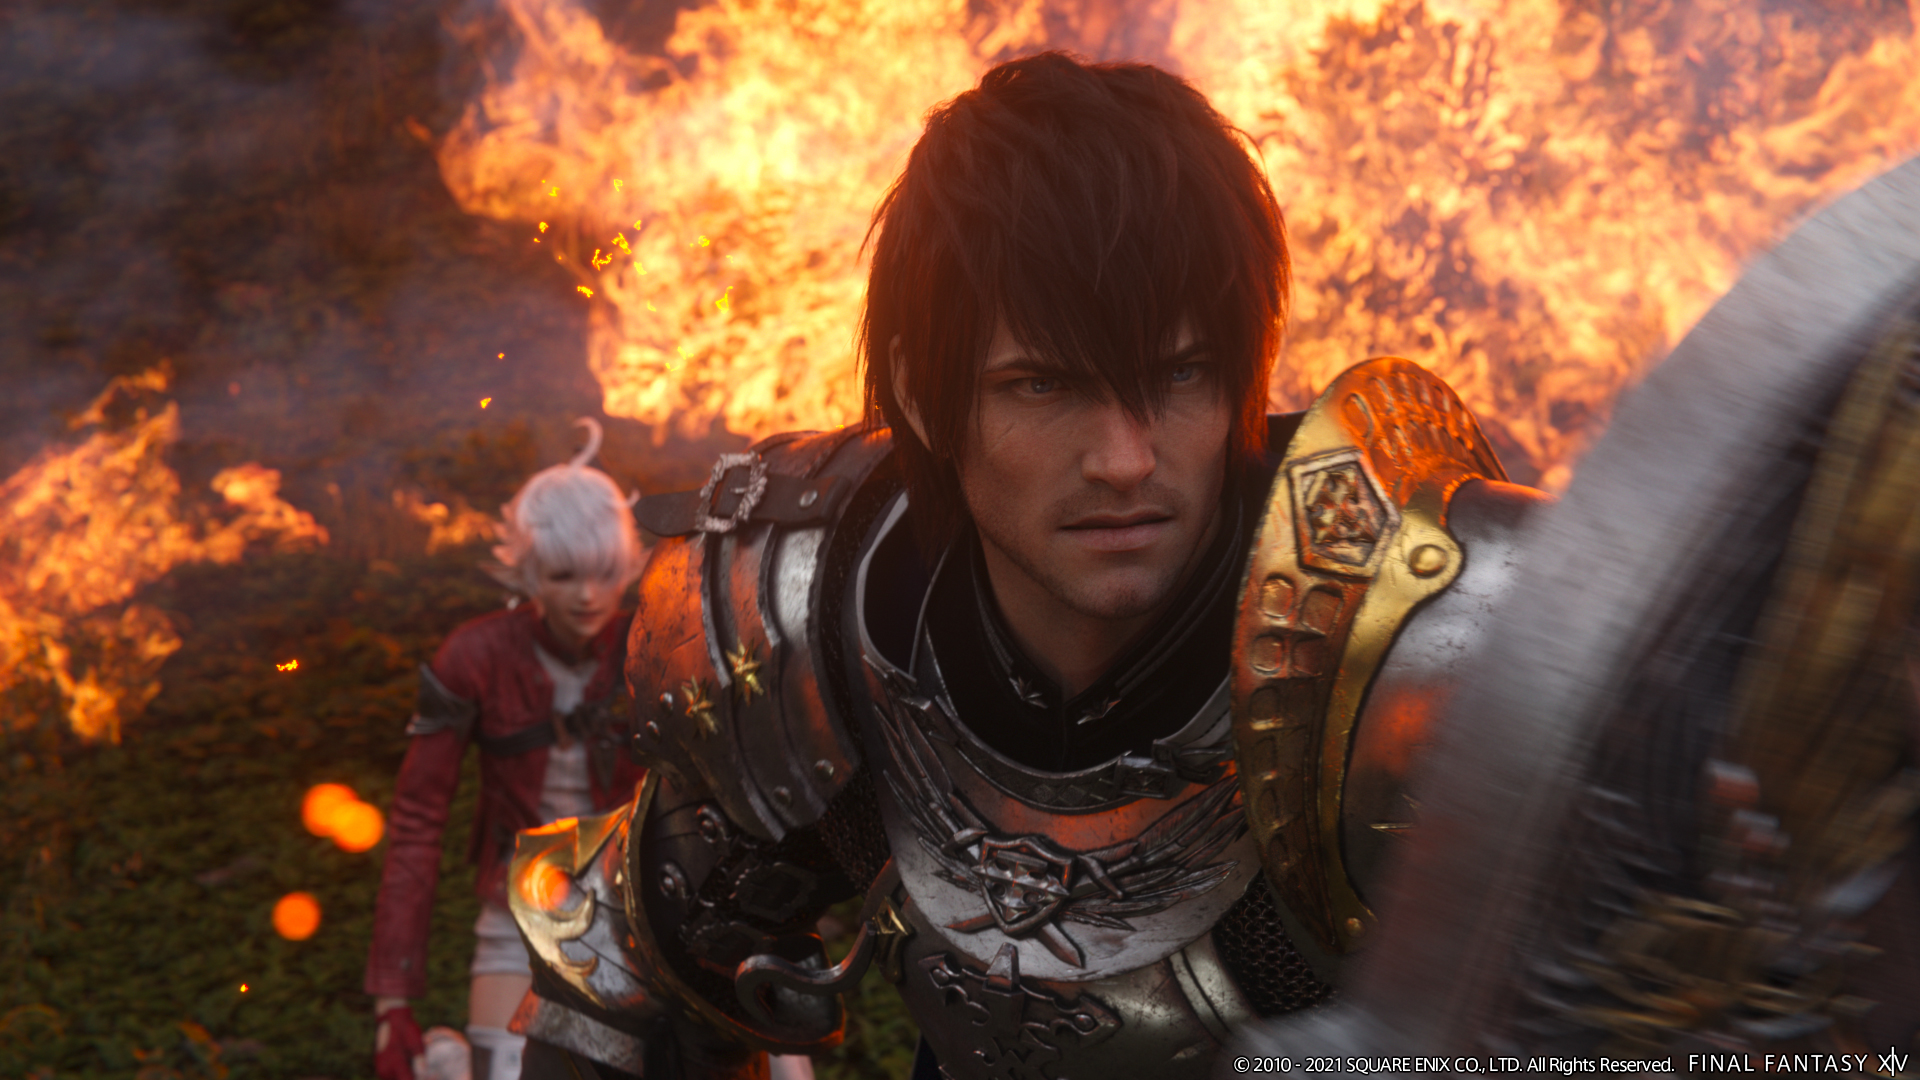 “The home of Final Fantasy is on console”: Director Naoki Yoshida on bringing Final Fantasy 14: Endwalker to PS5